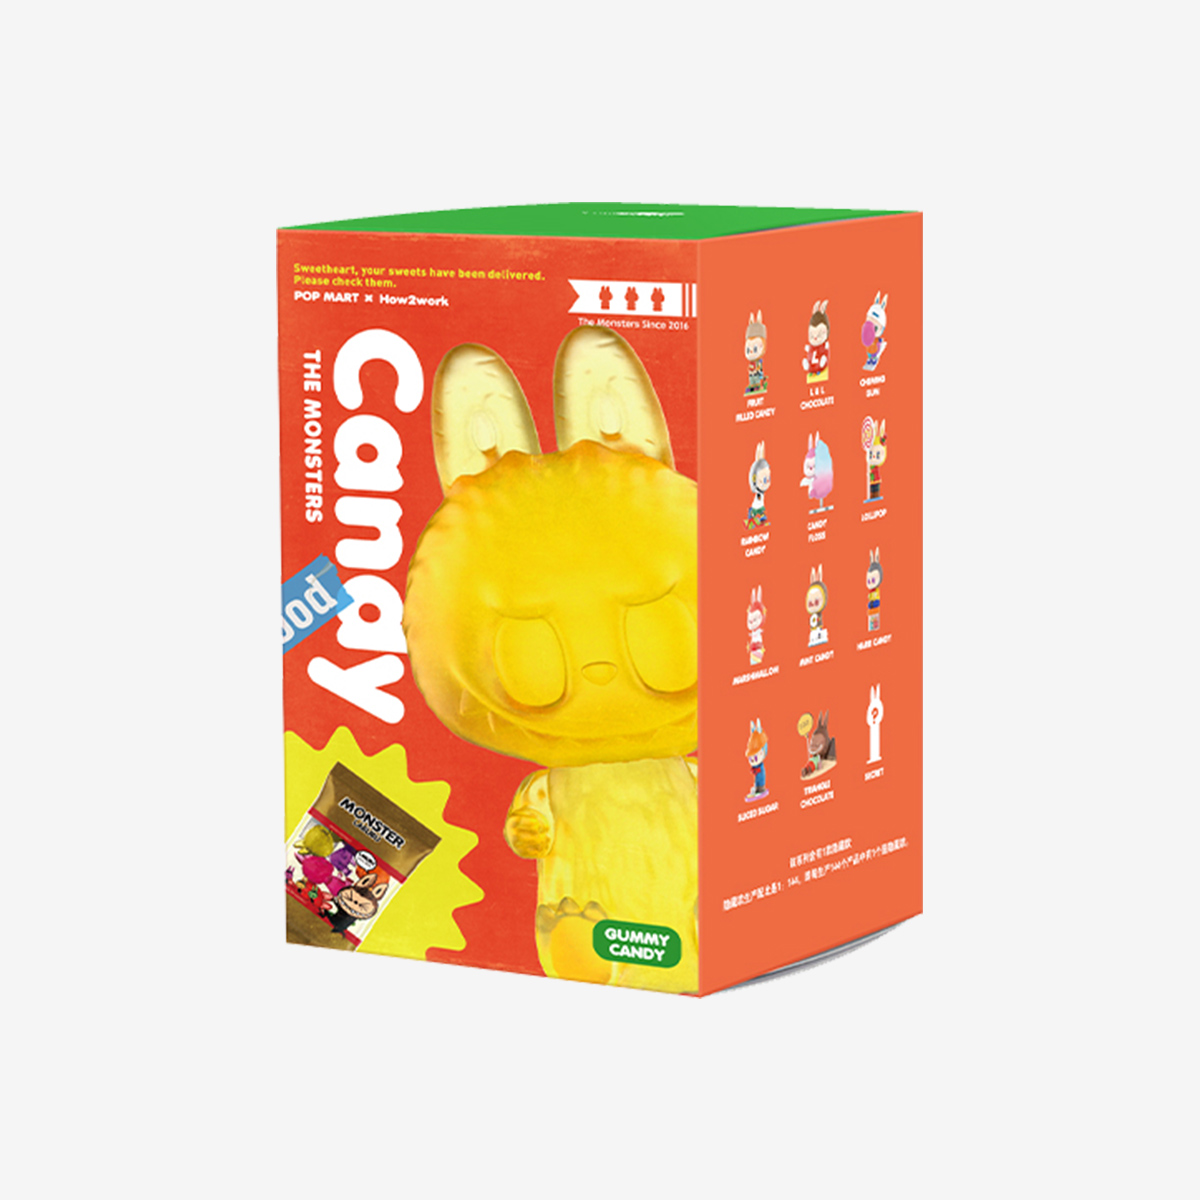 POP MART The Monsters Candy Series Mystery Box Action Figurine